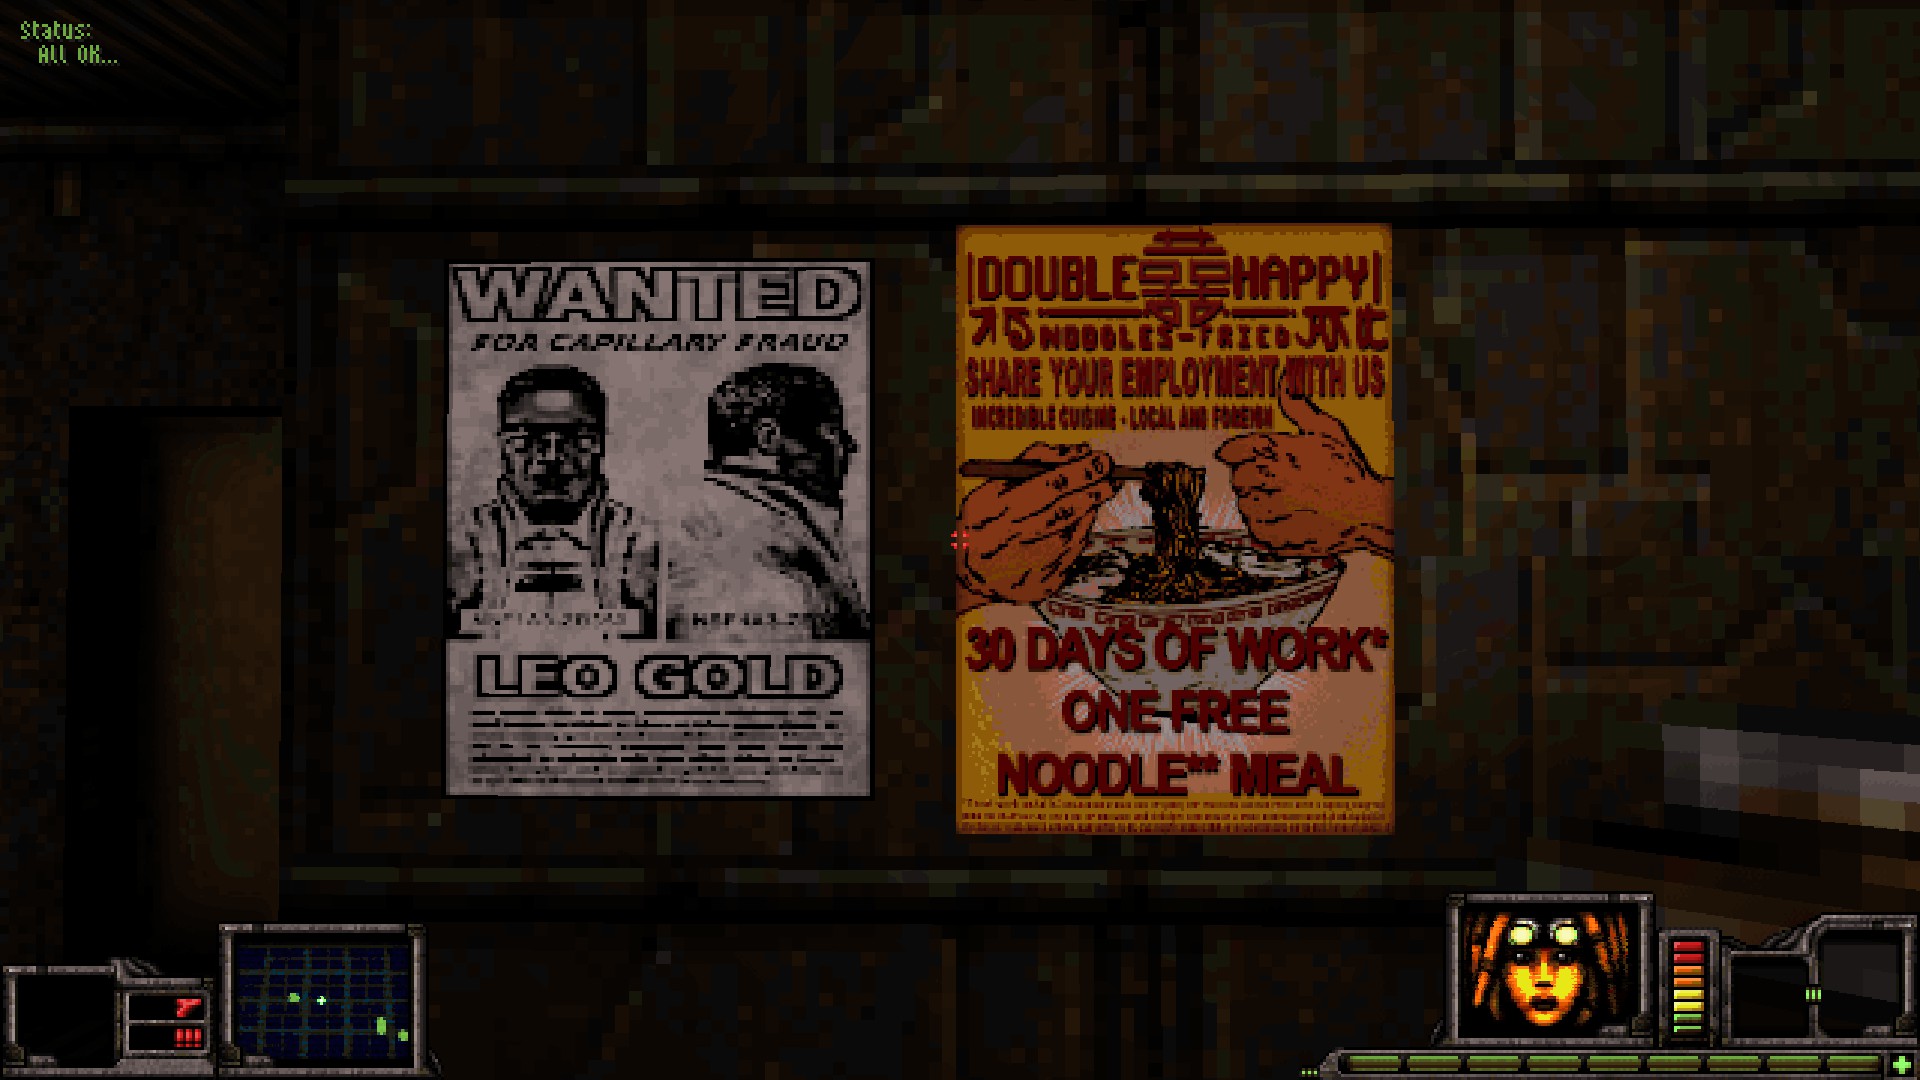 Deus Ex reference in Fortune's Run: Wanted poster for 